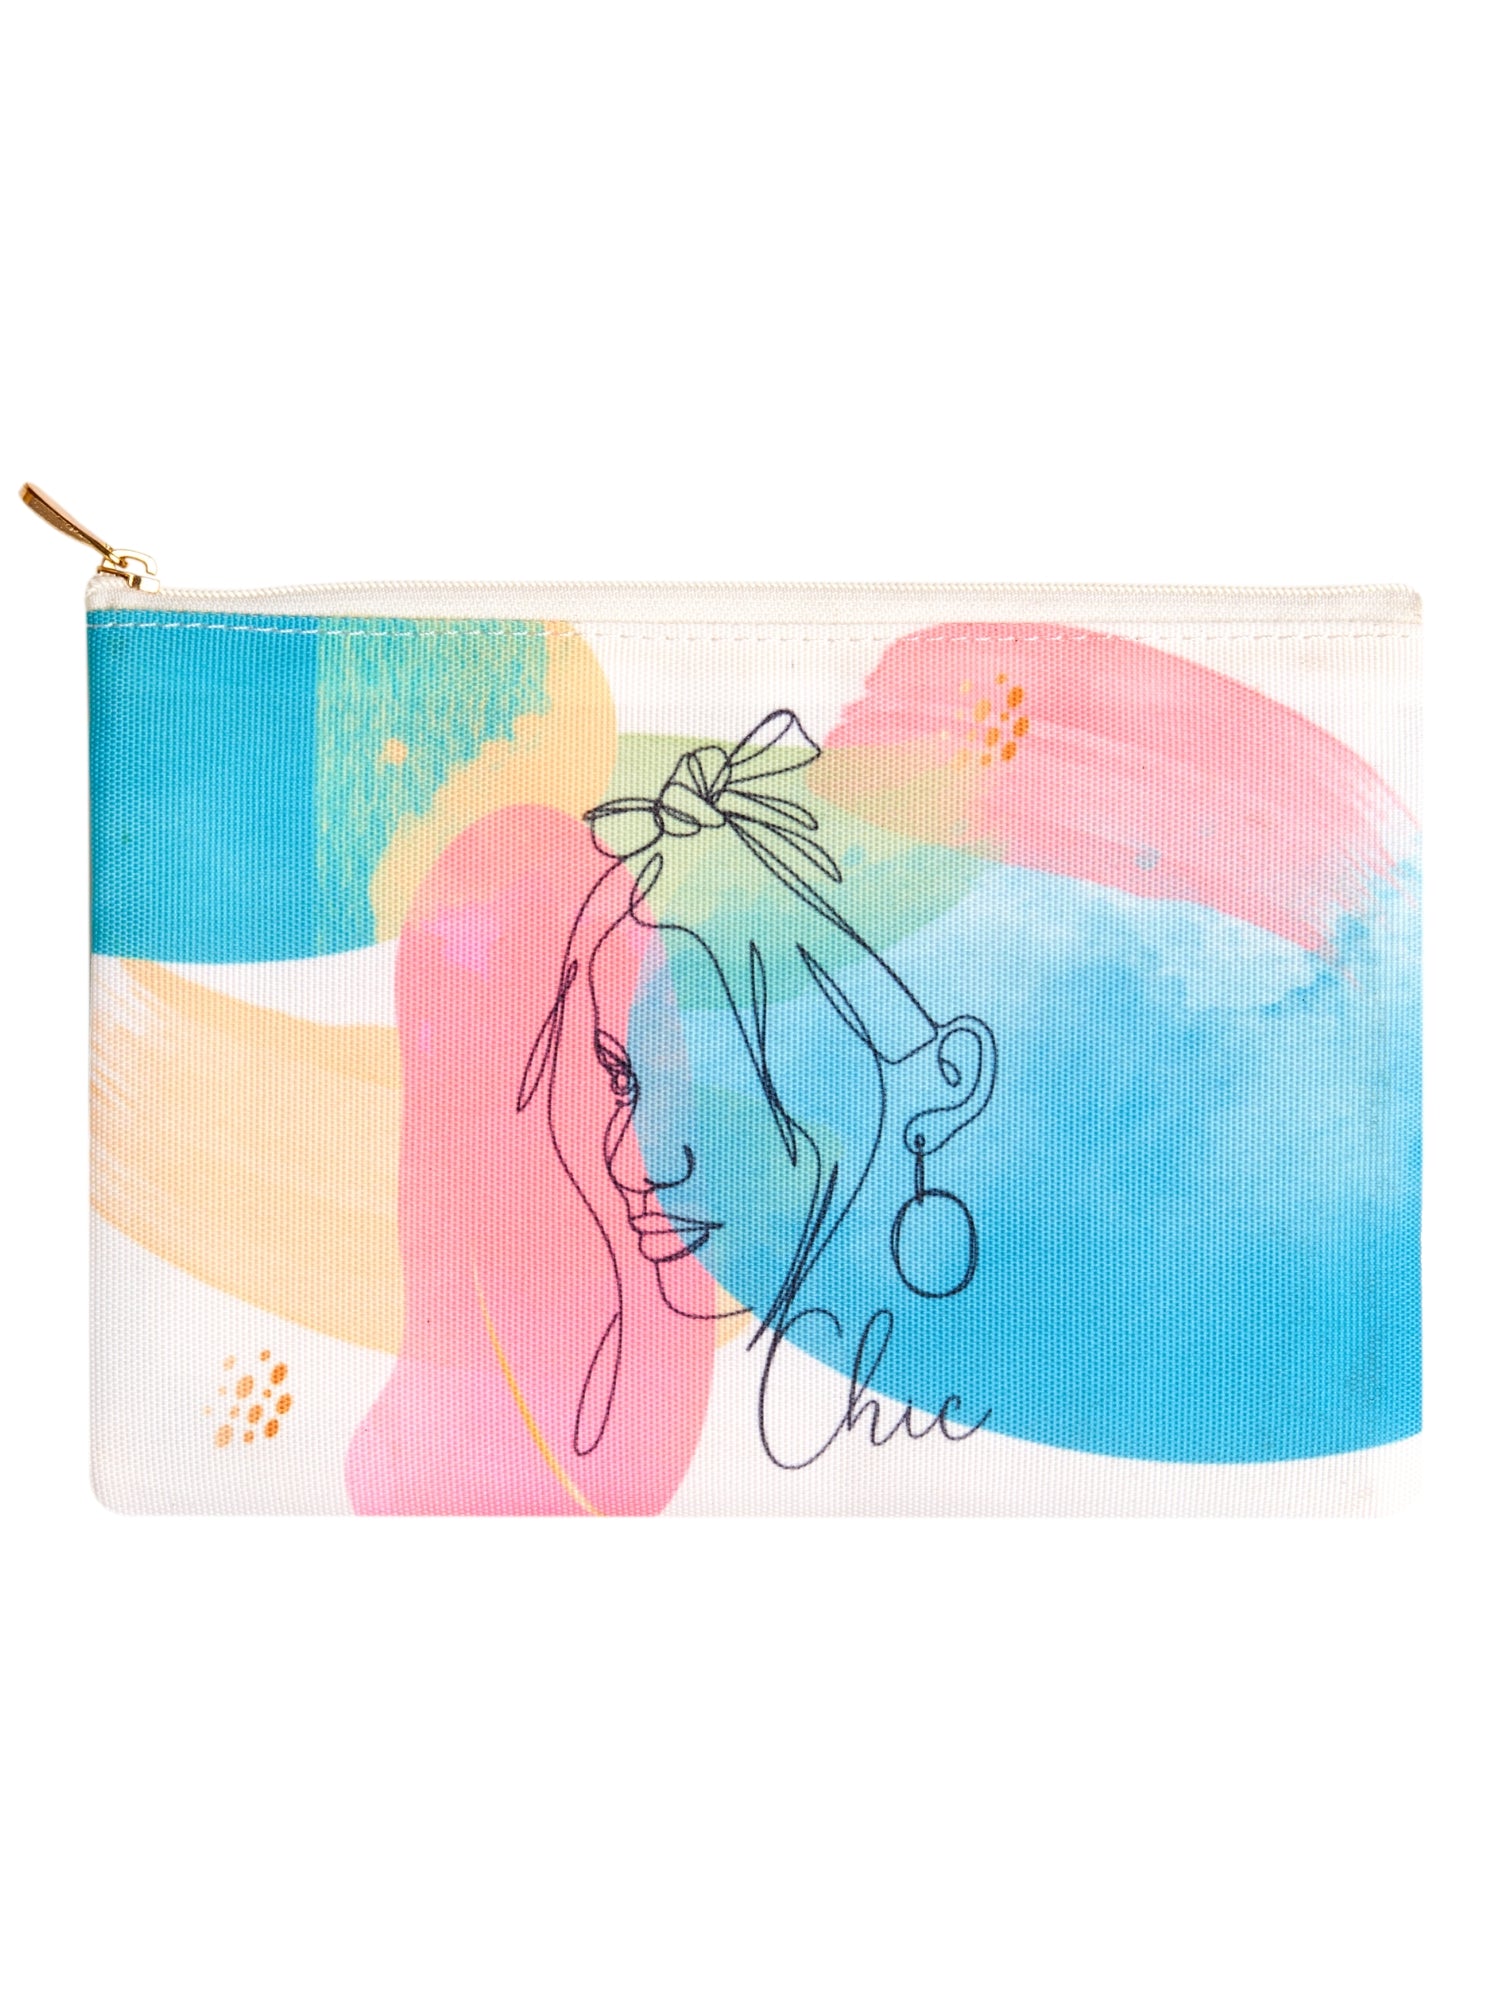 Chic Pouch